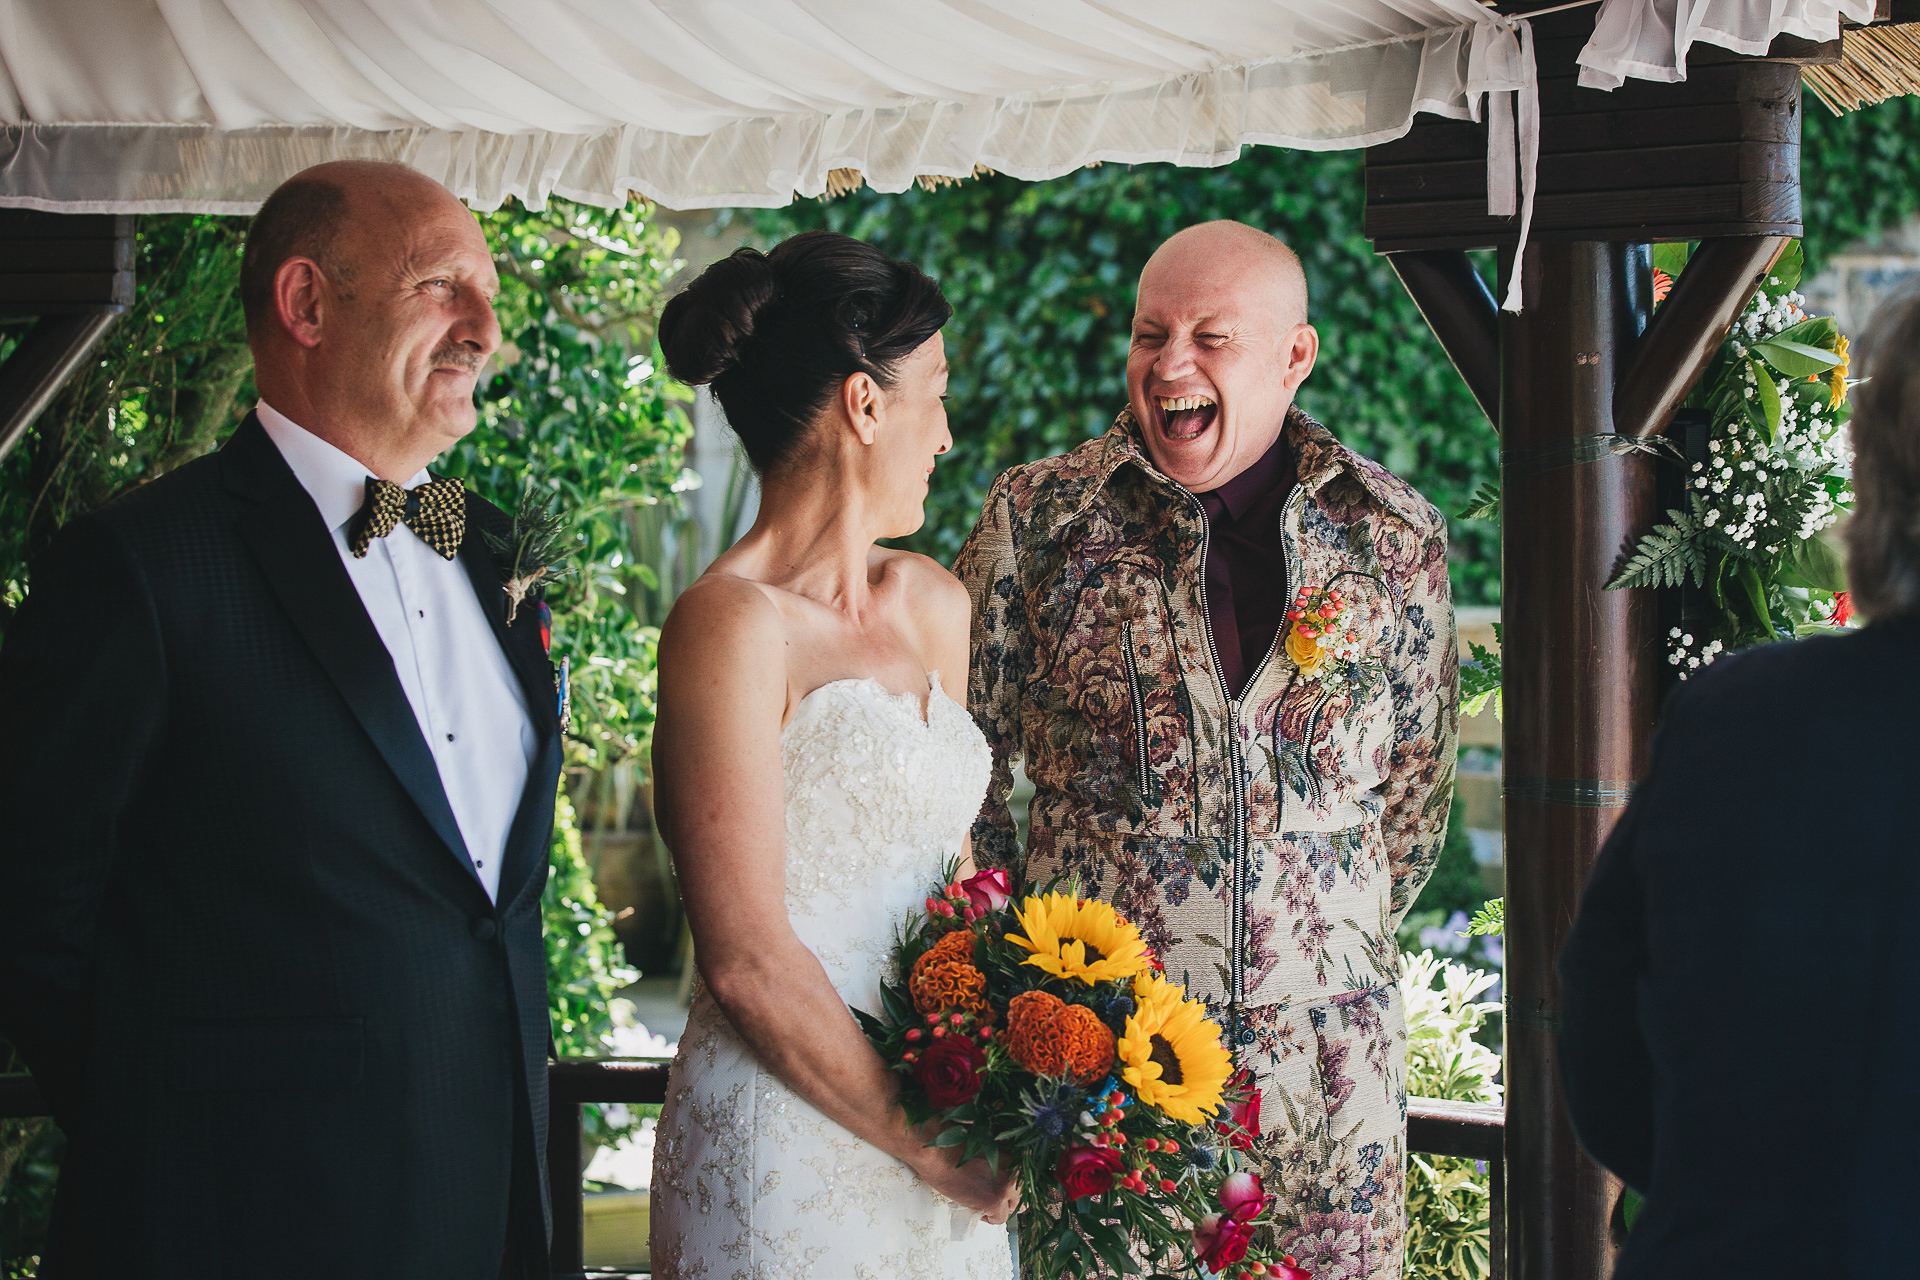 Man in floral suit smiling widely at bride